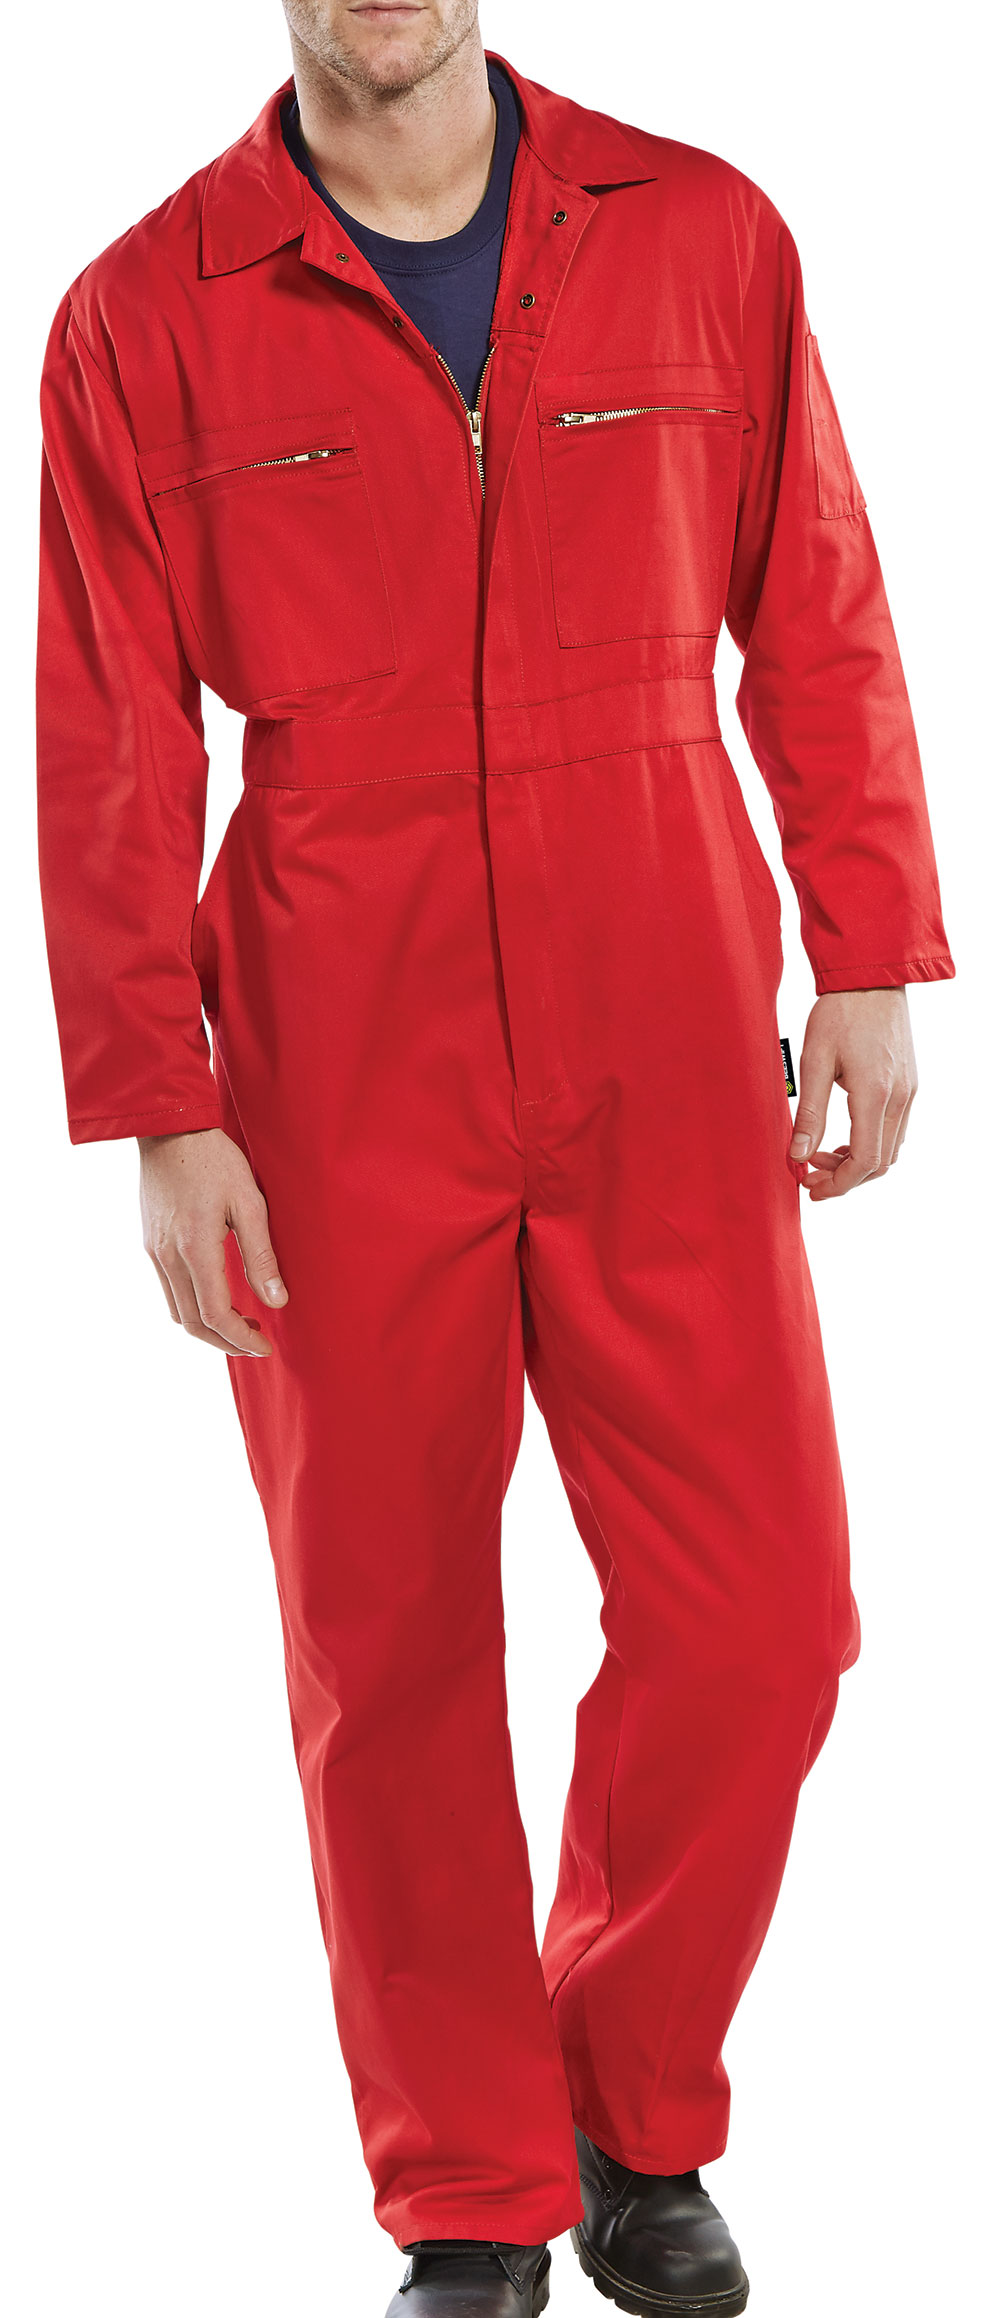 SUPER CLICK HEAVY WEIGHT BOILERSUIT